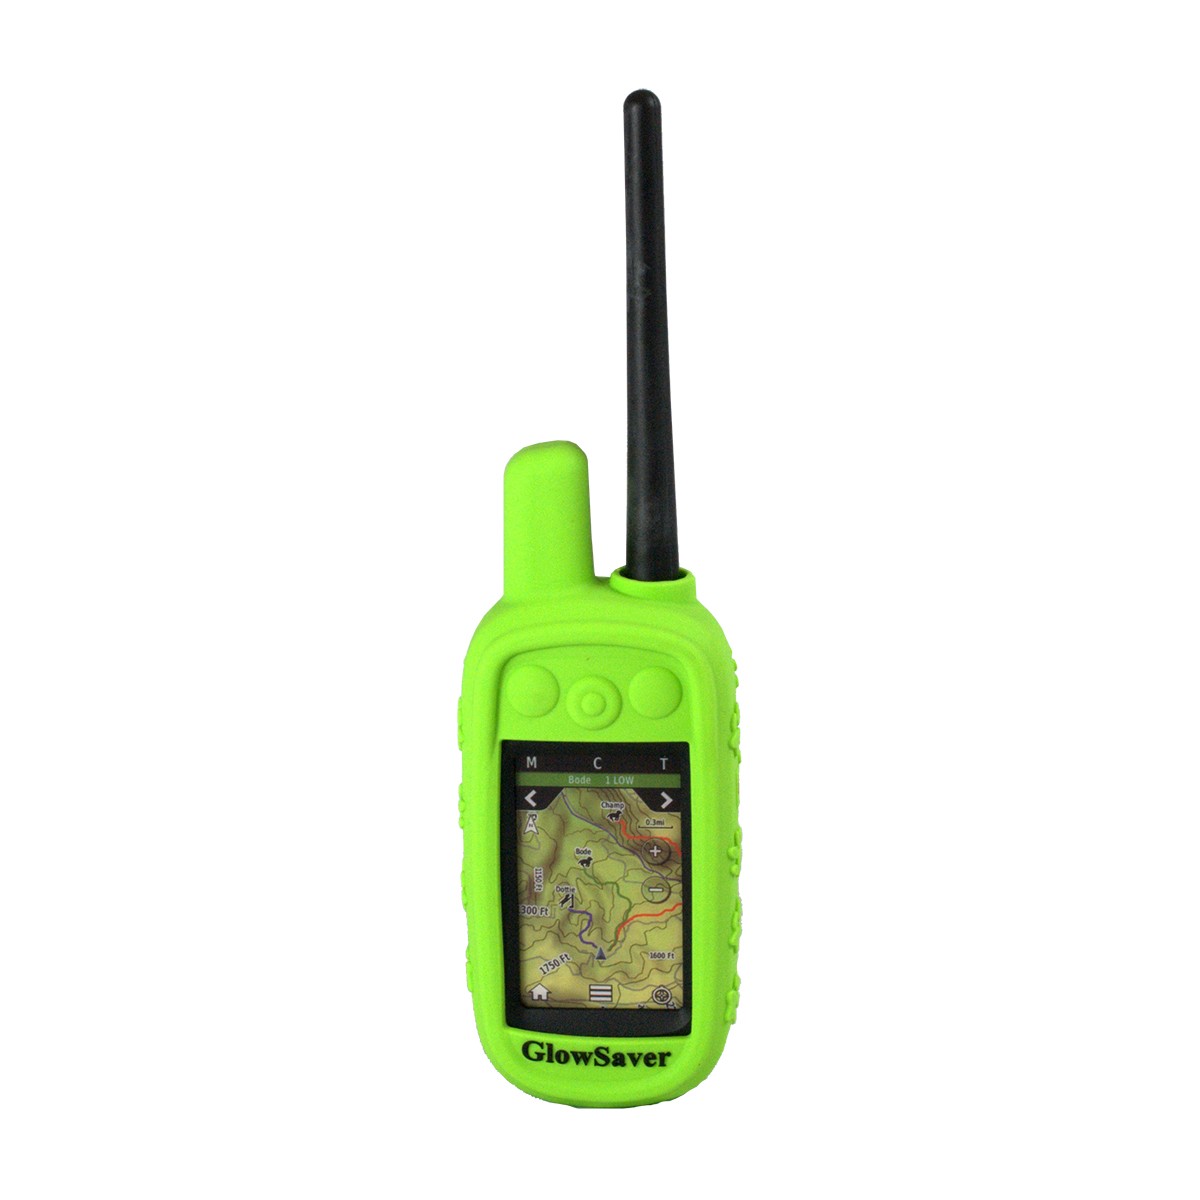 The Buzzard's Bright Green Alpha Roost GlowSaver Case